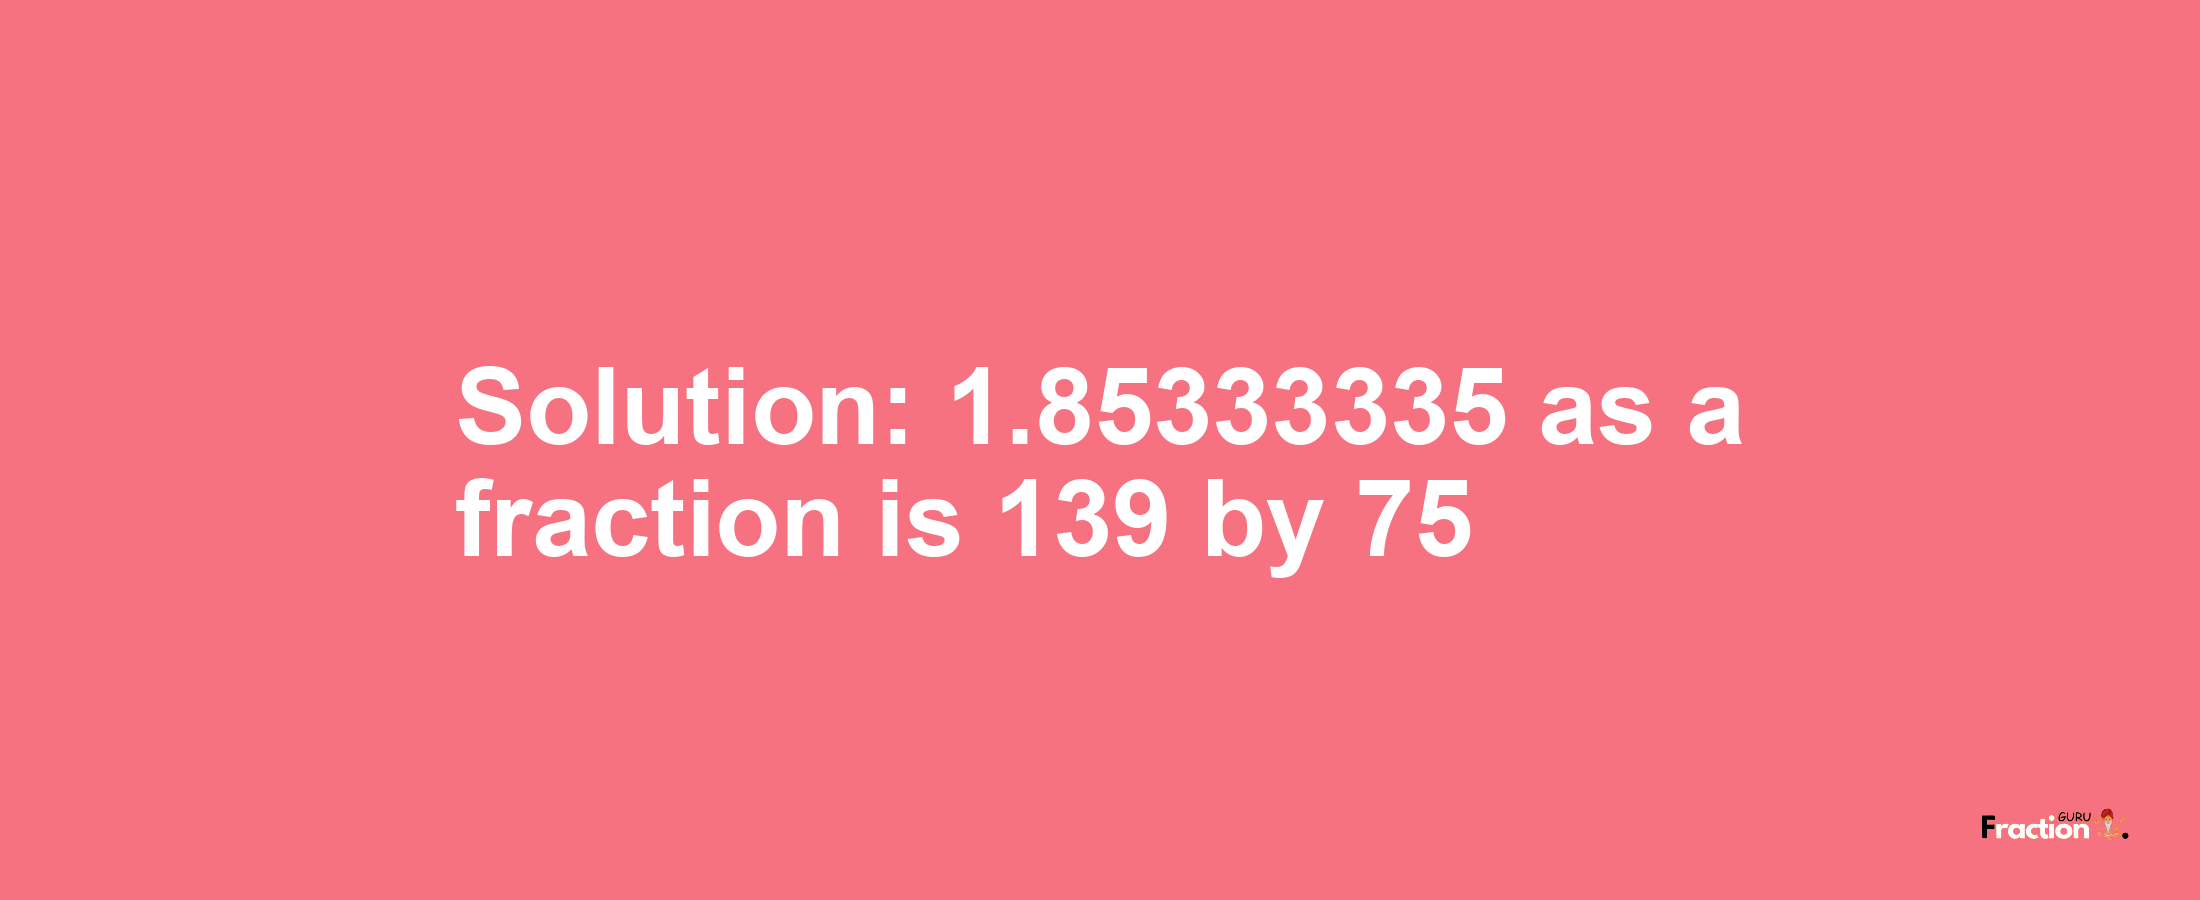 Solution:1.85333335 as a fraction is 139/75